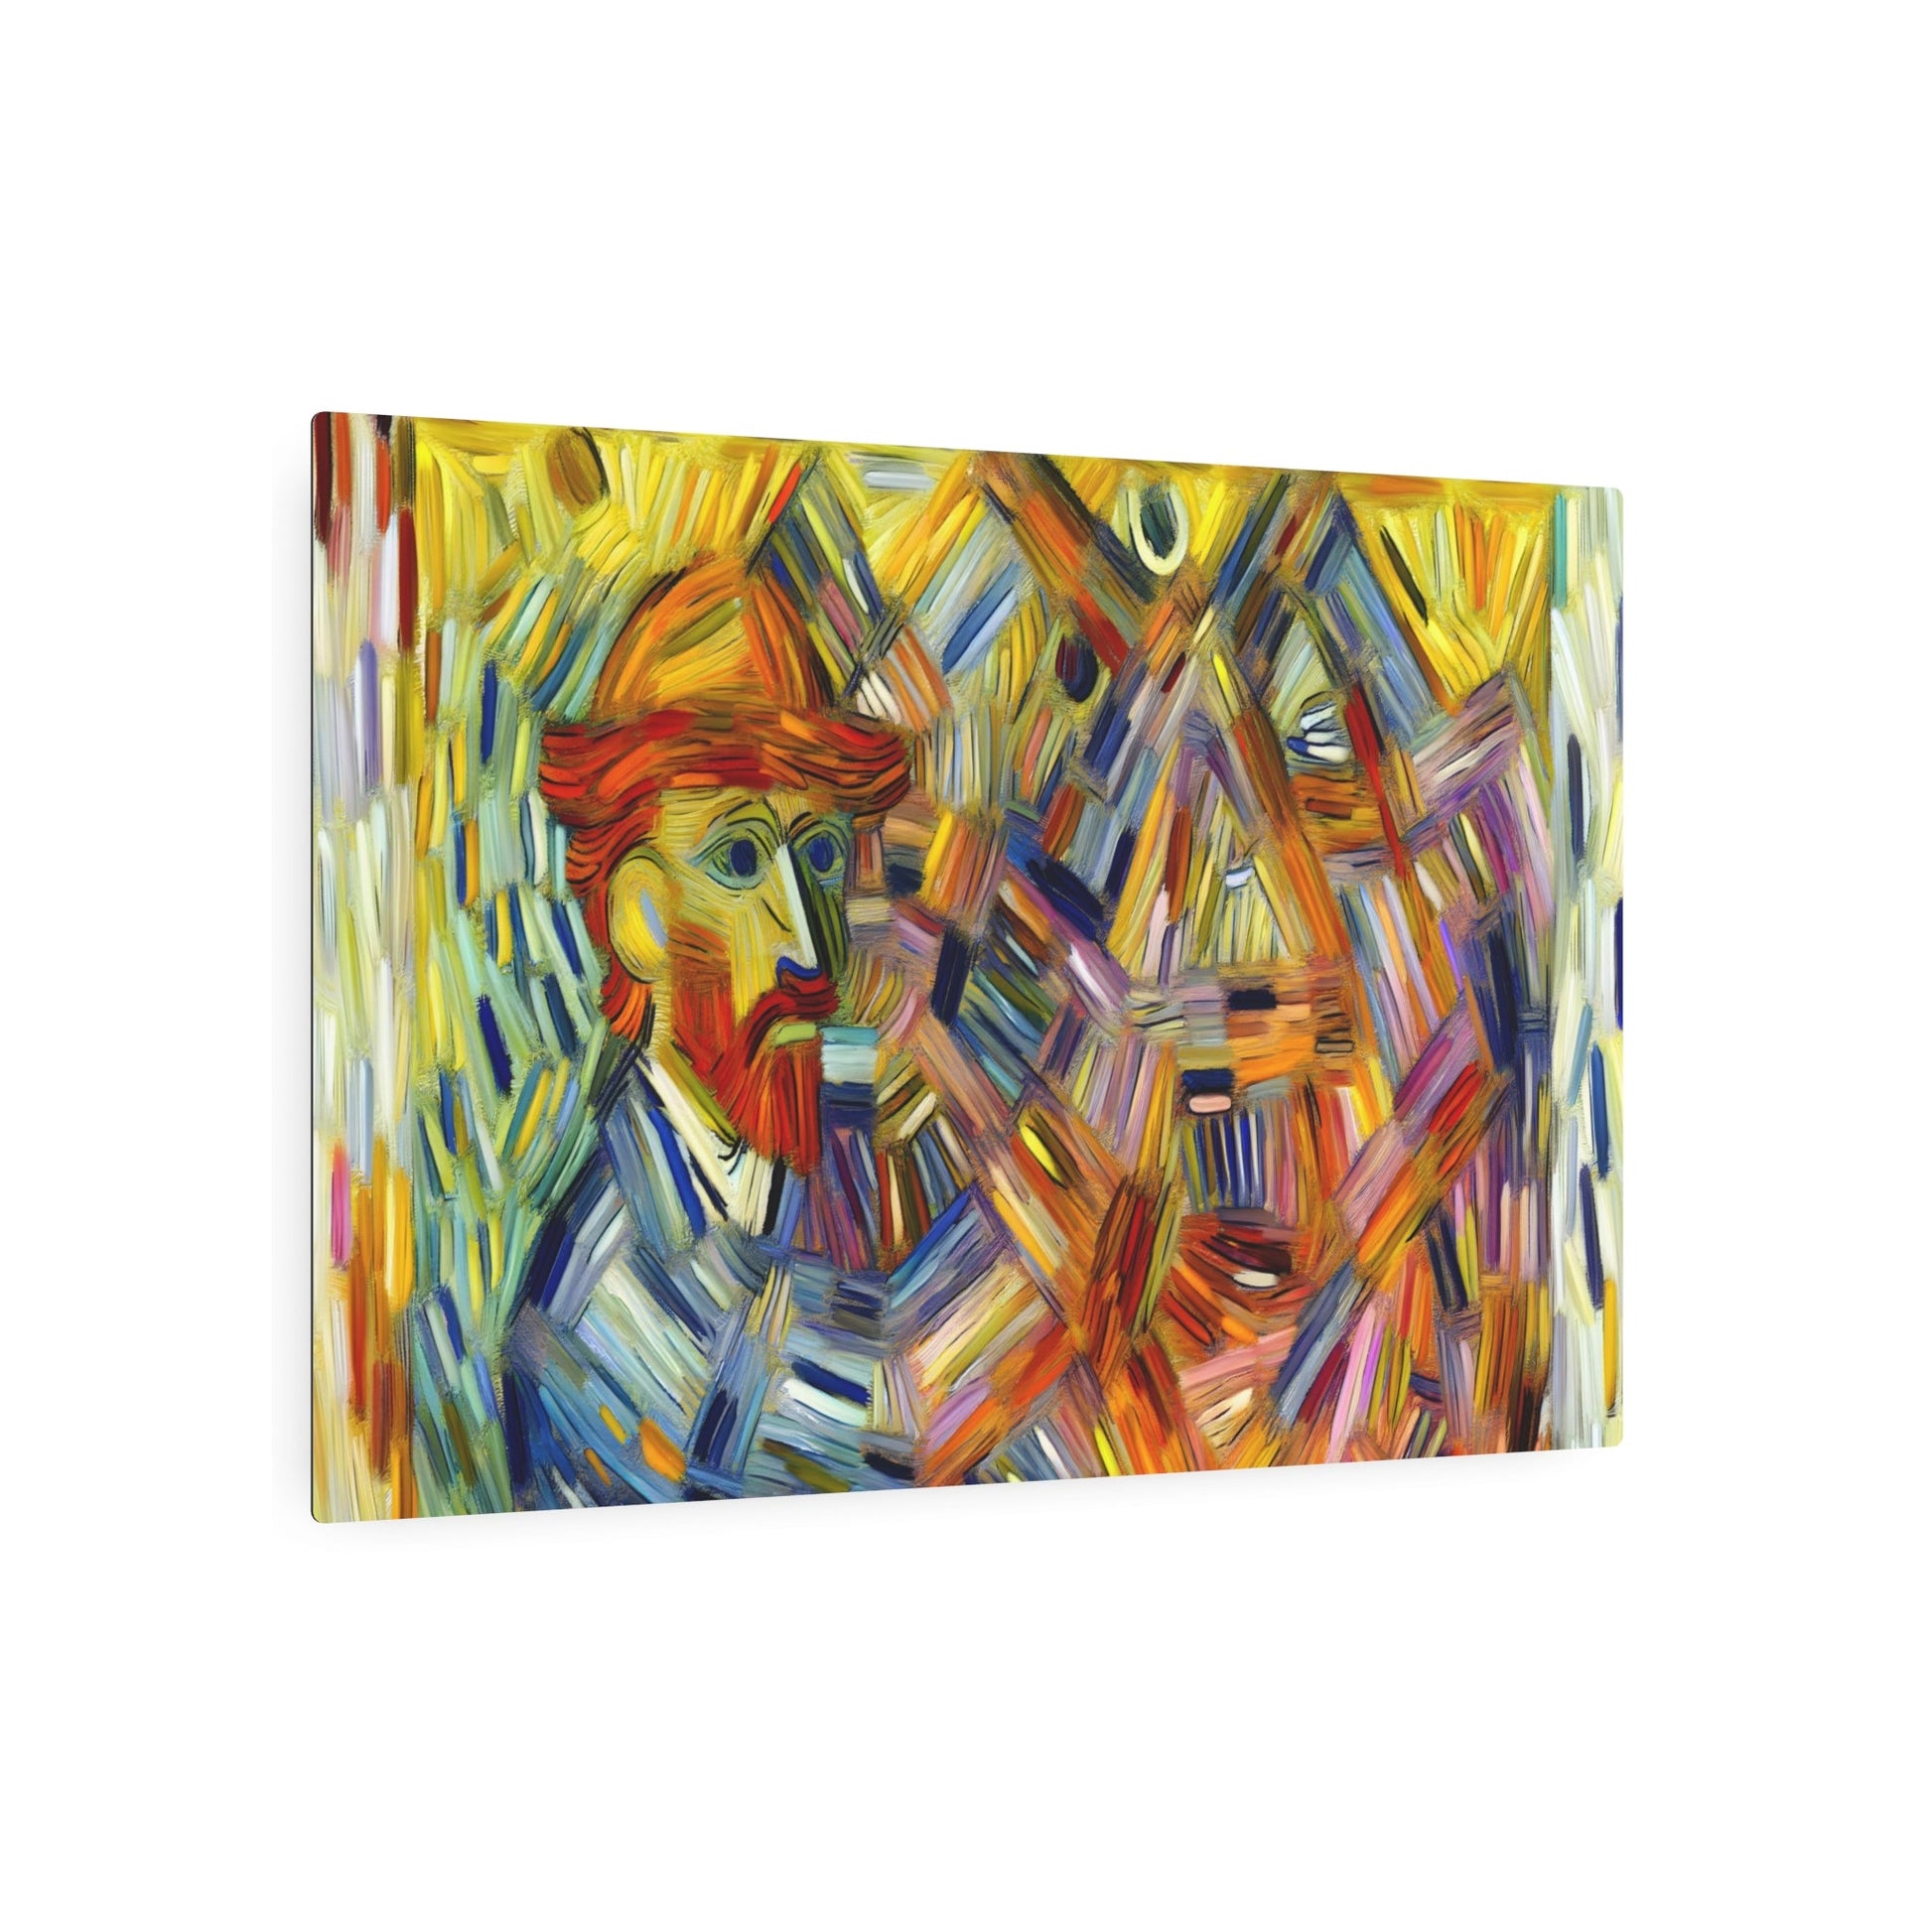 Metal Poster Art | "Post-Impressionist Style Artwork with Vivid Colors and Geometric Forms - Western Art Styles Collection" - Metal Poster Art 36″ x 24″ (Horizontal) 0.12''